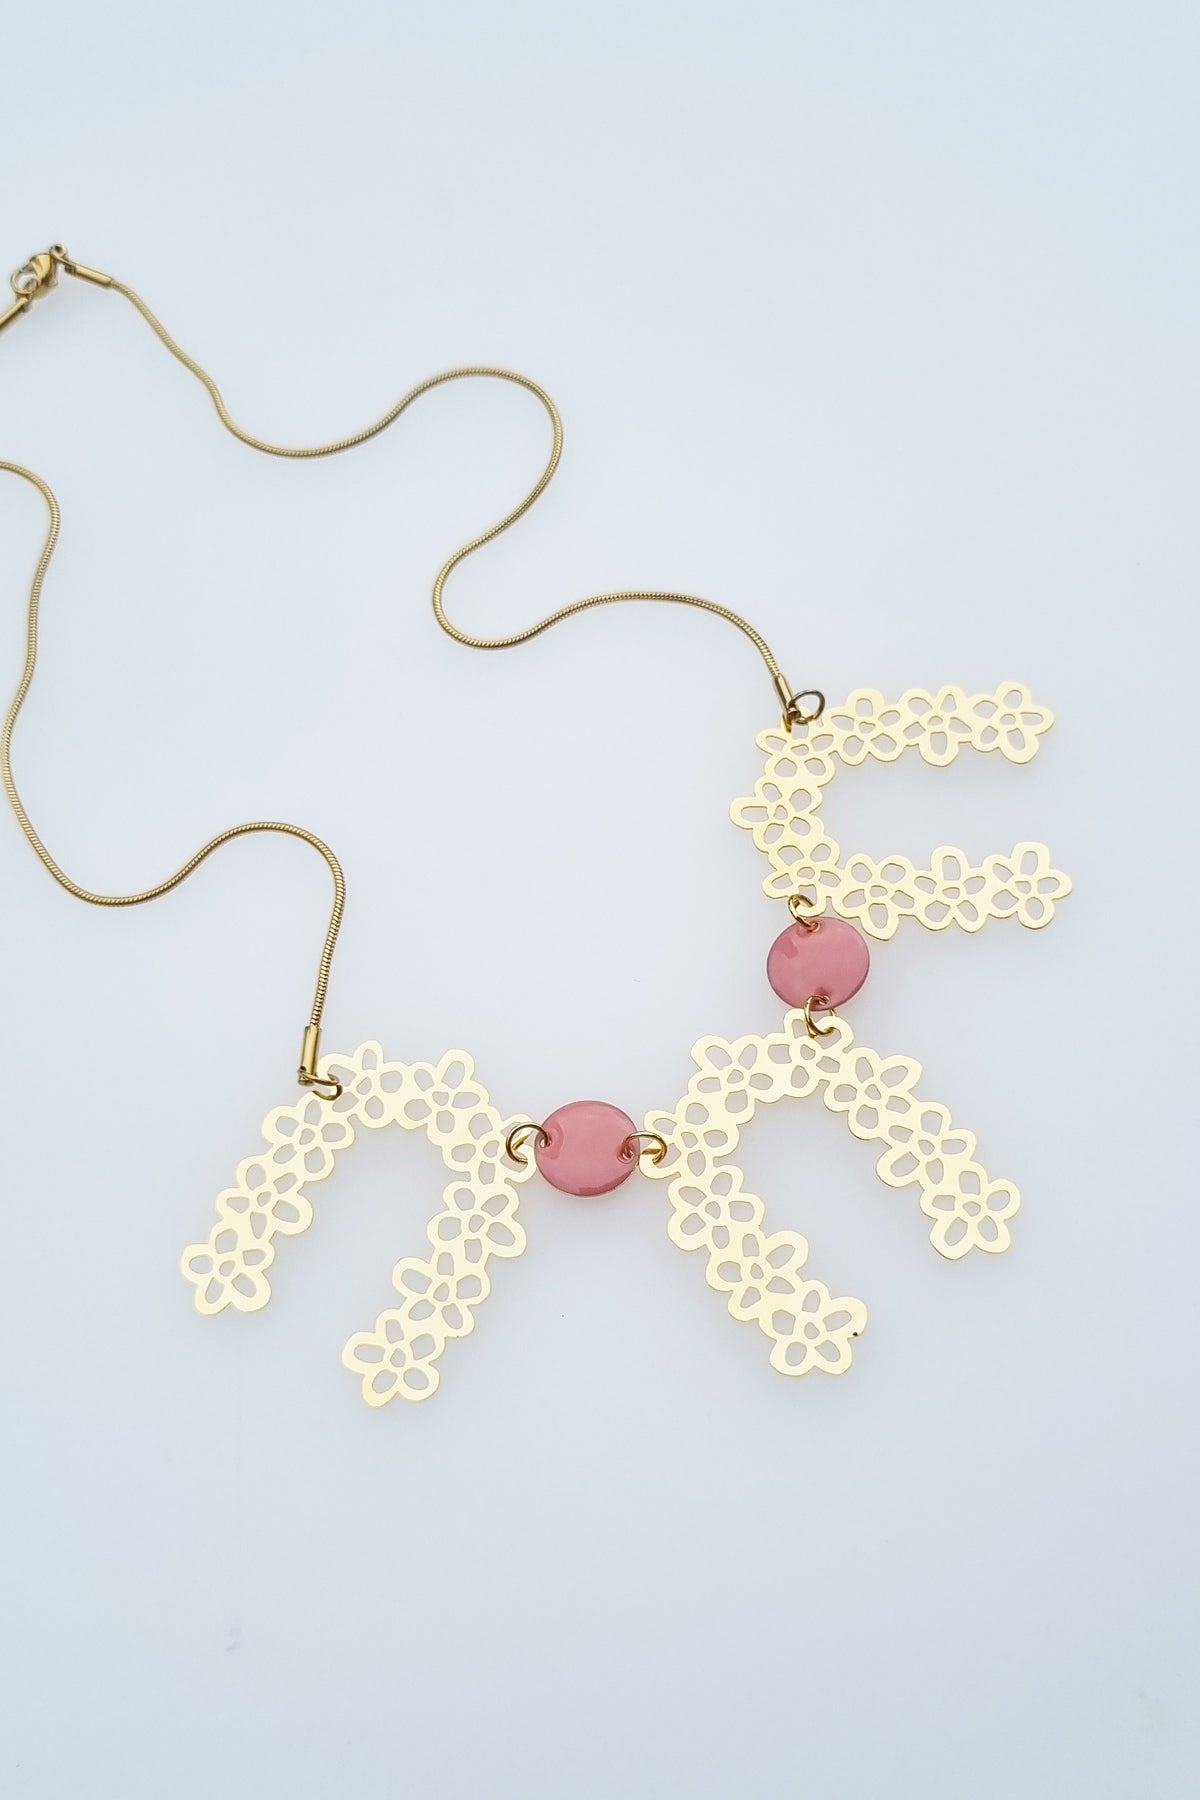 A necklace sits against a white background. It features a gold chair with three floral brass arch pieces, and two pink enamel connector dots separating each arch.